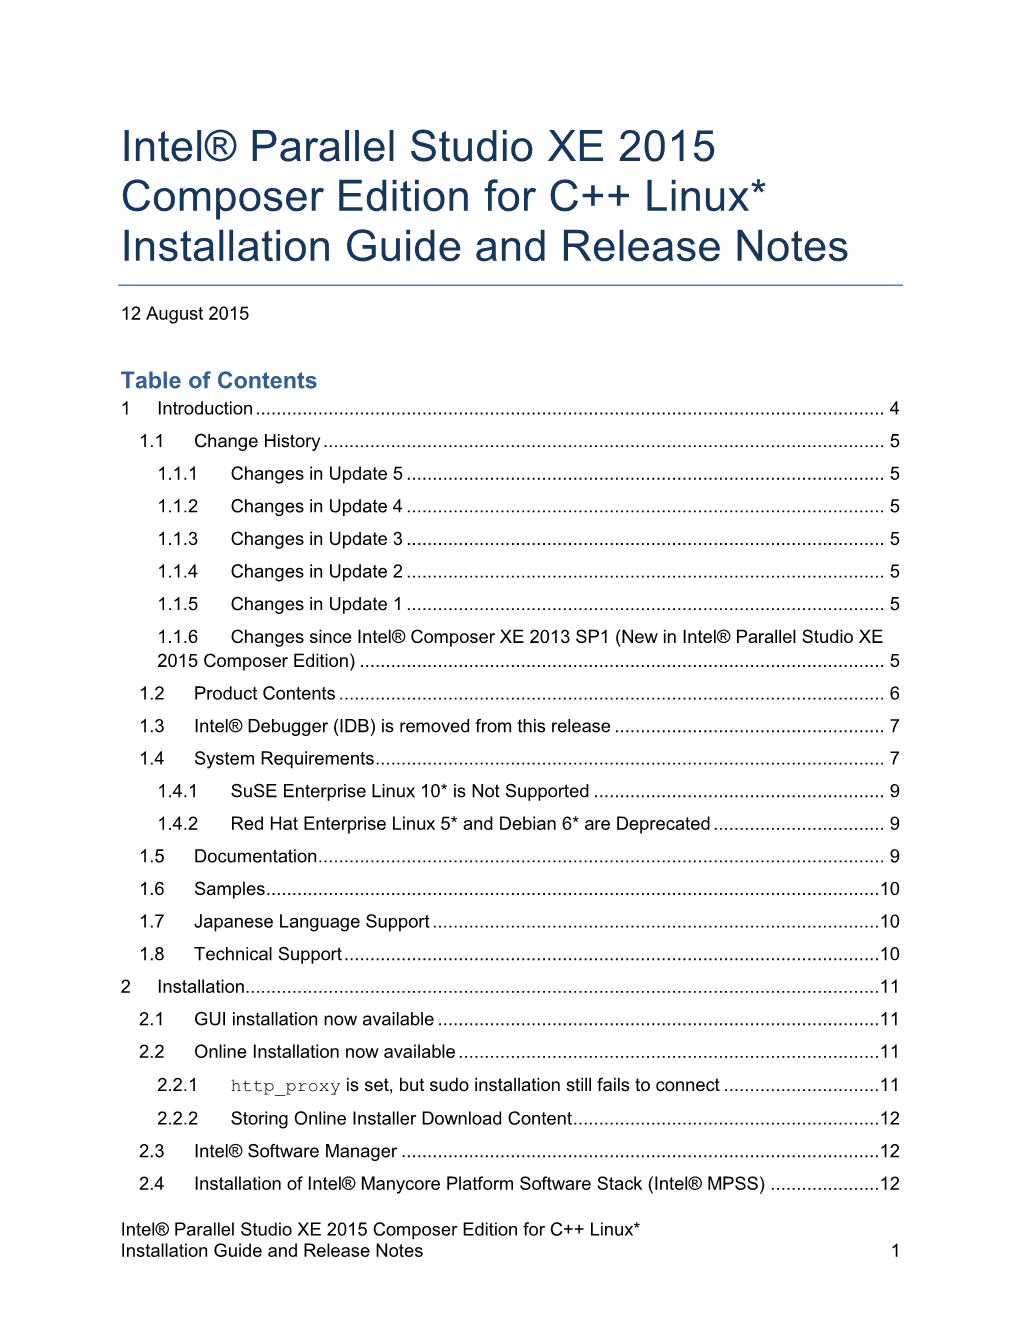 Intel® Parallel Studio XE 2015 Composer Edition for C++ Linux*